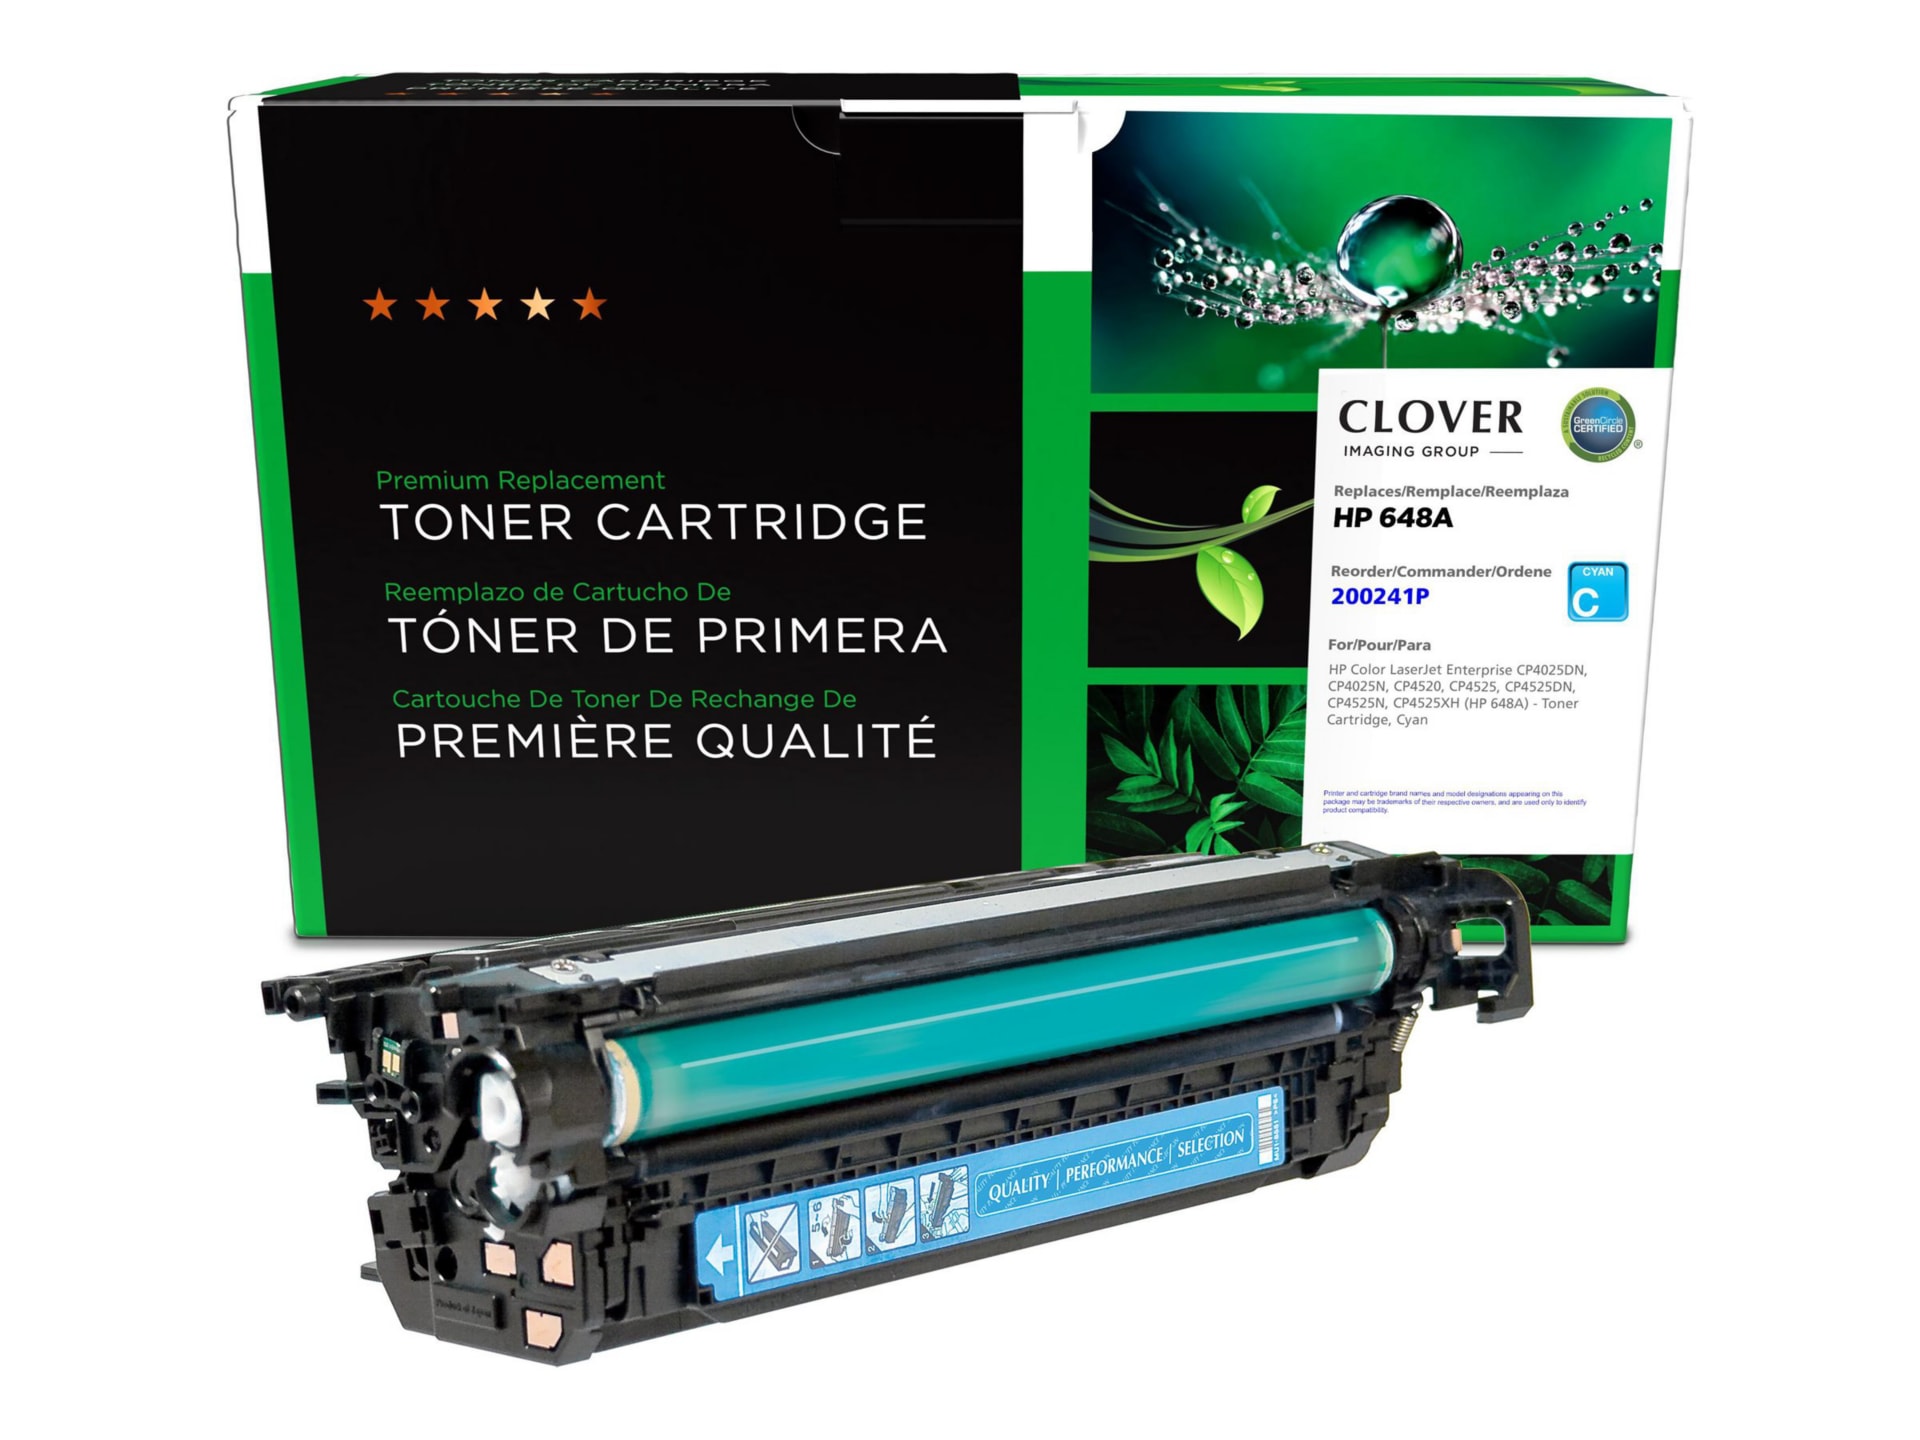 Clover Remanufactured Toner for HP CE261A (648A), Cyan, 11,000 page yield